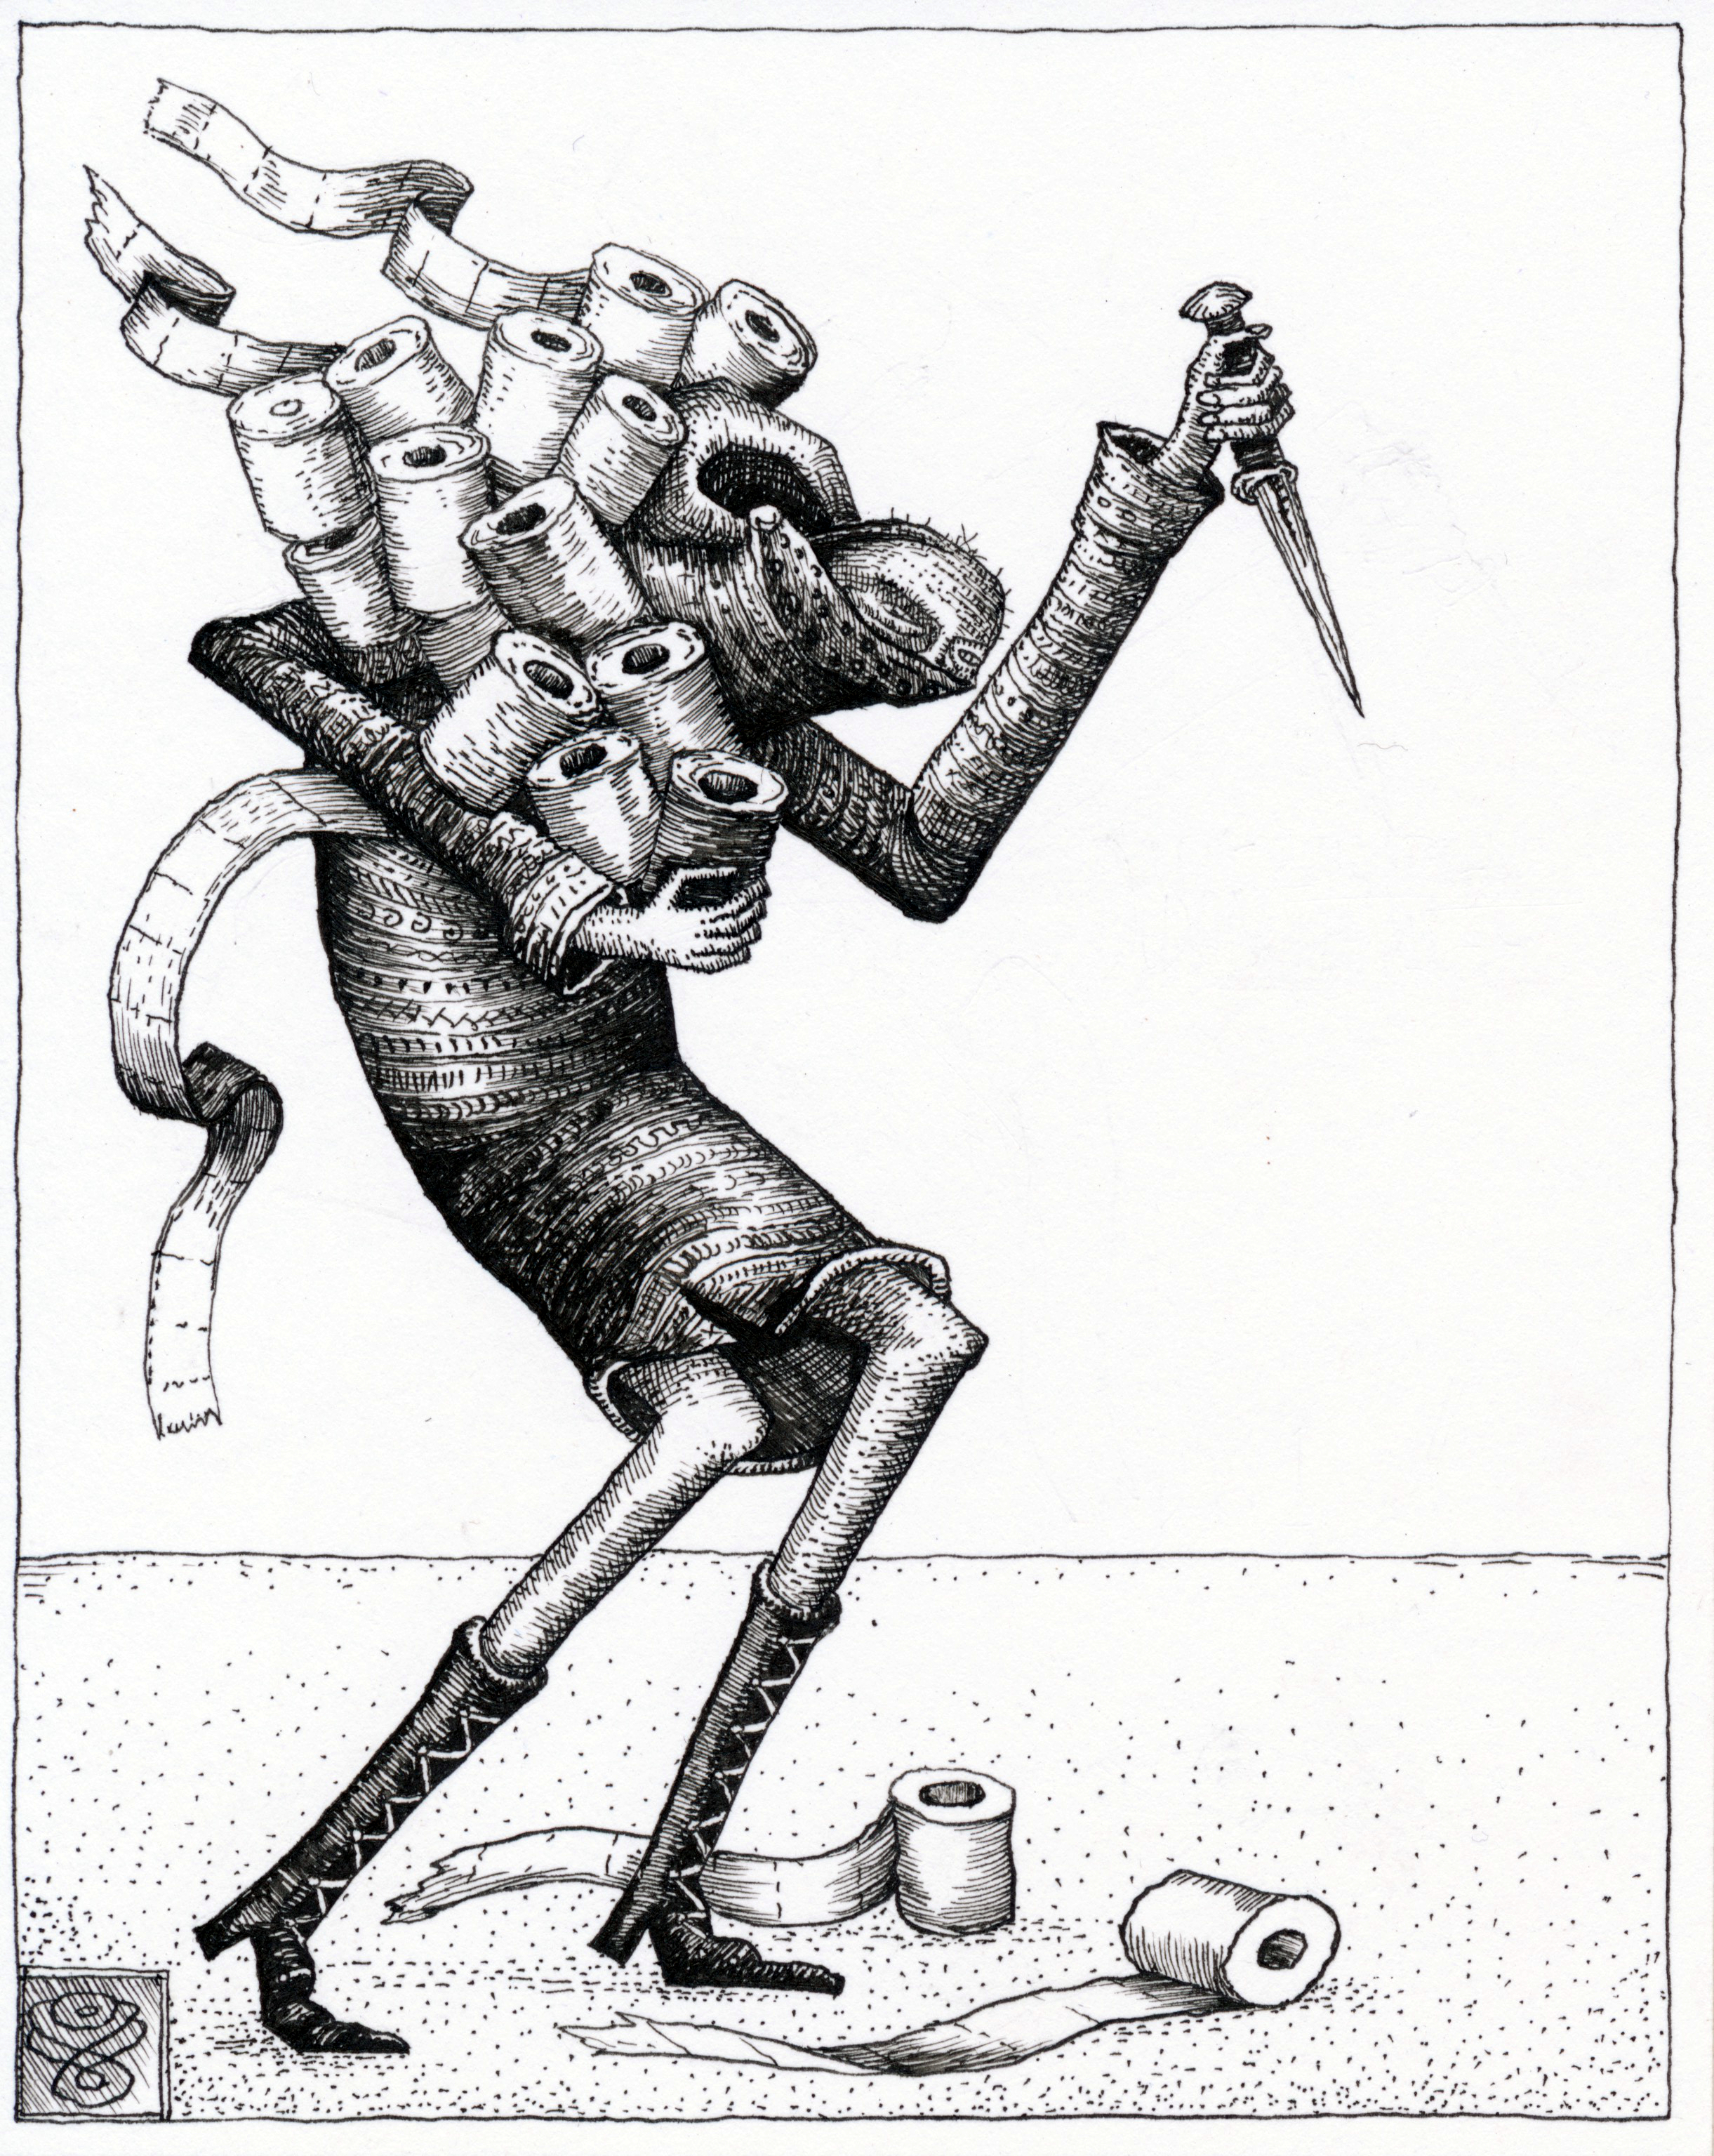 A pen and drink drawing of a human-like figure carrying a large amount of toilet rolls and a dagger. 